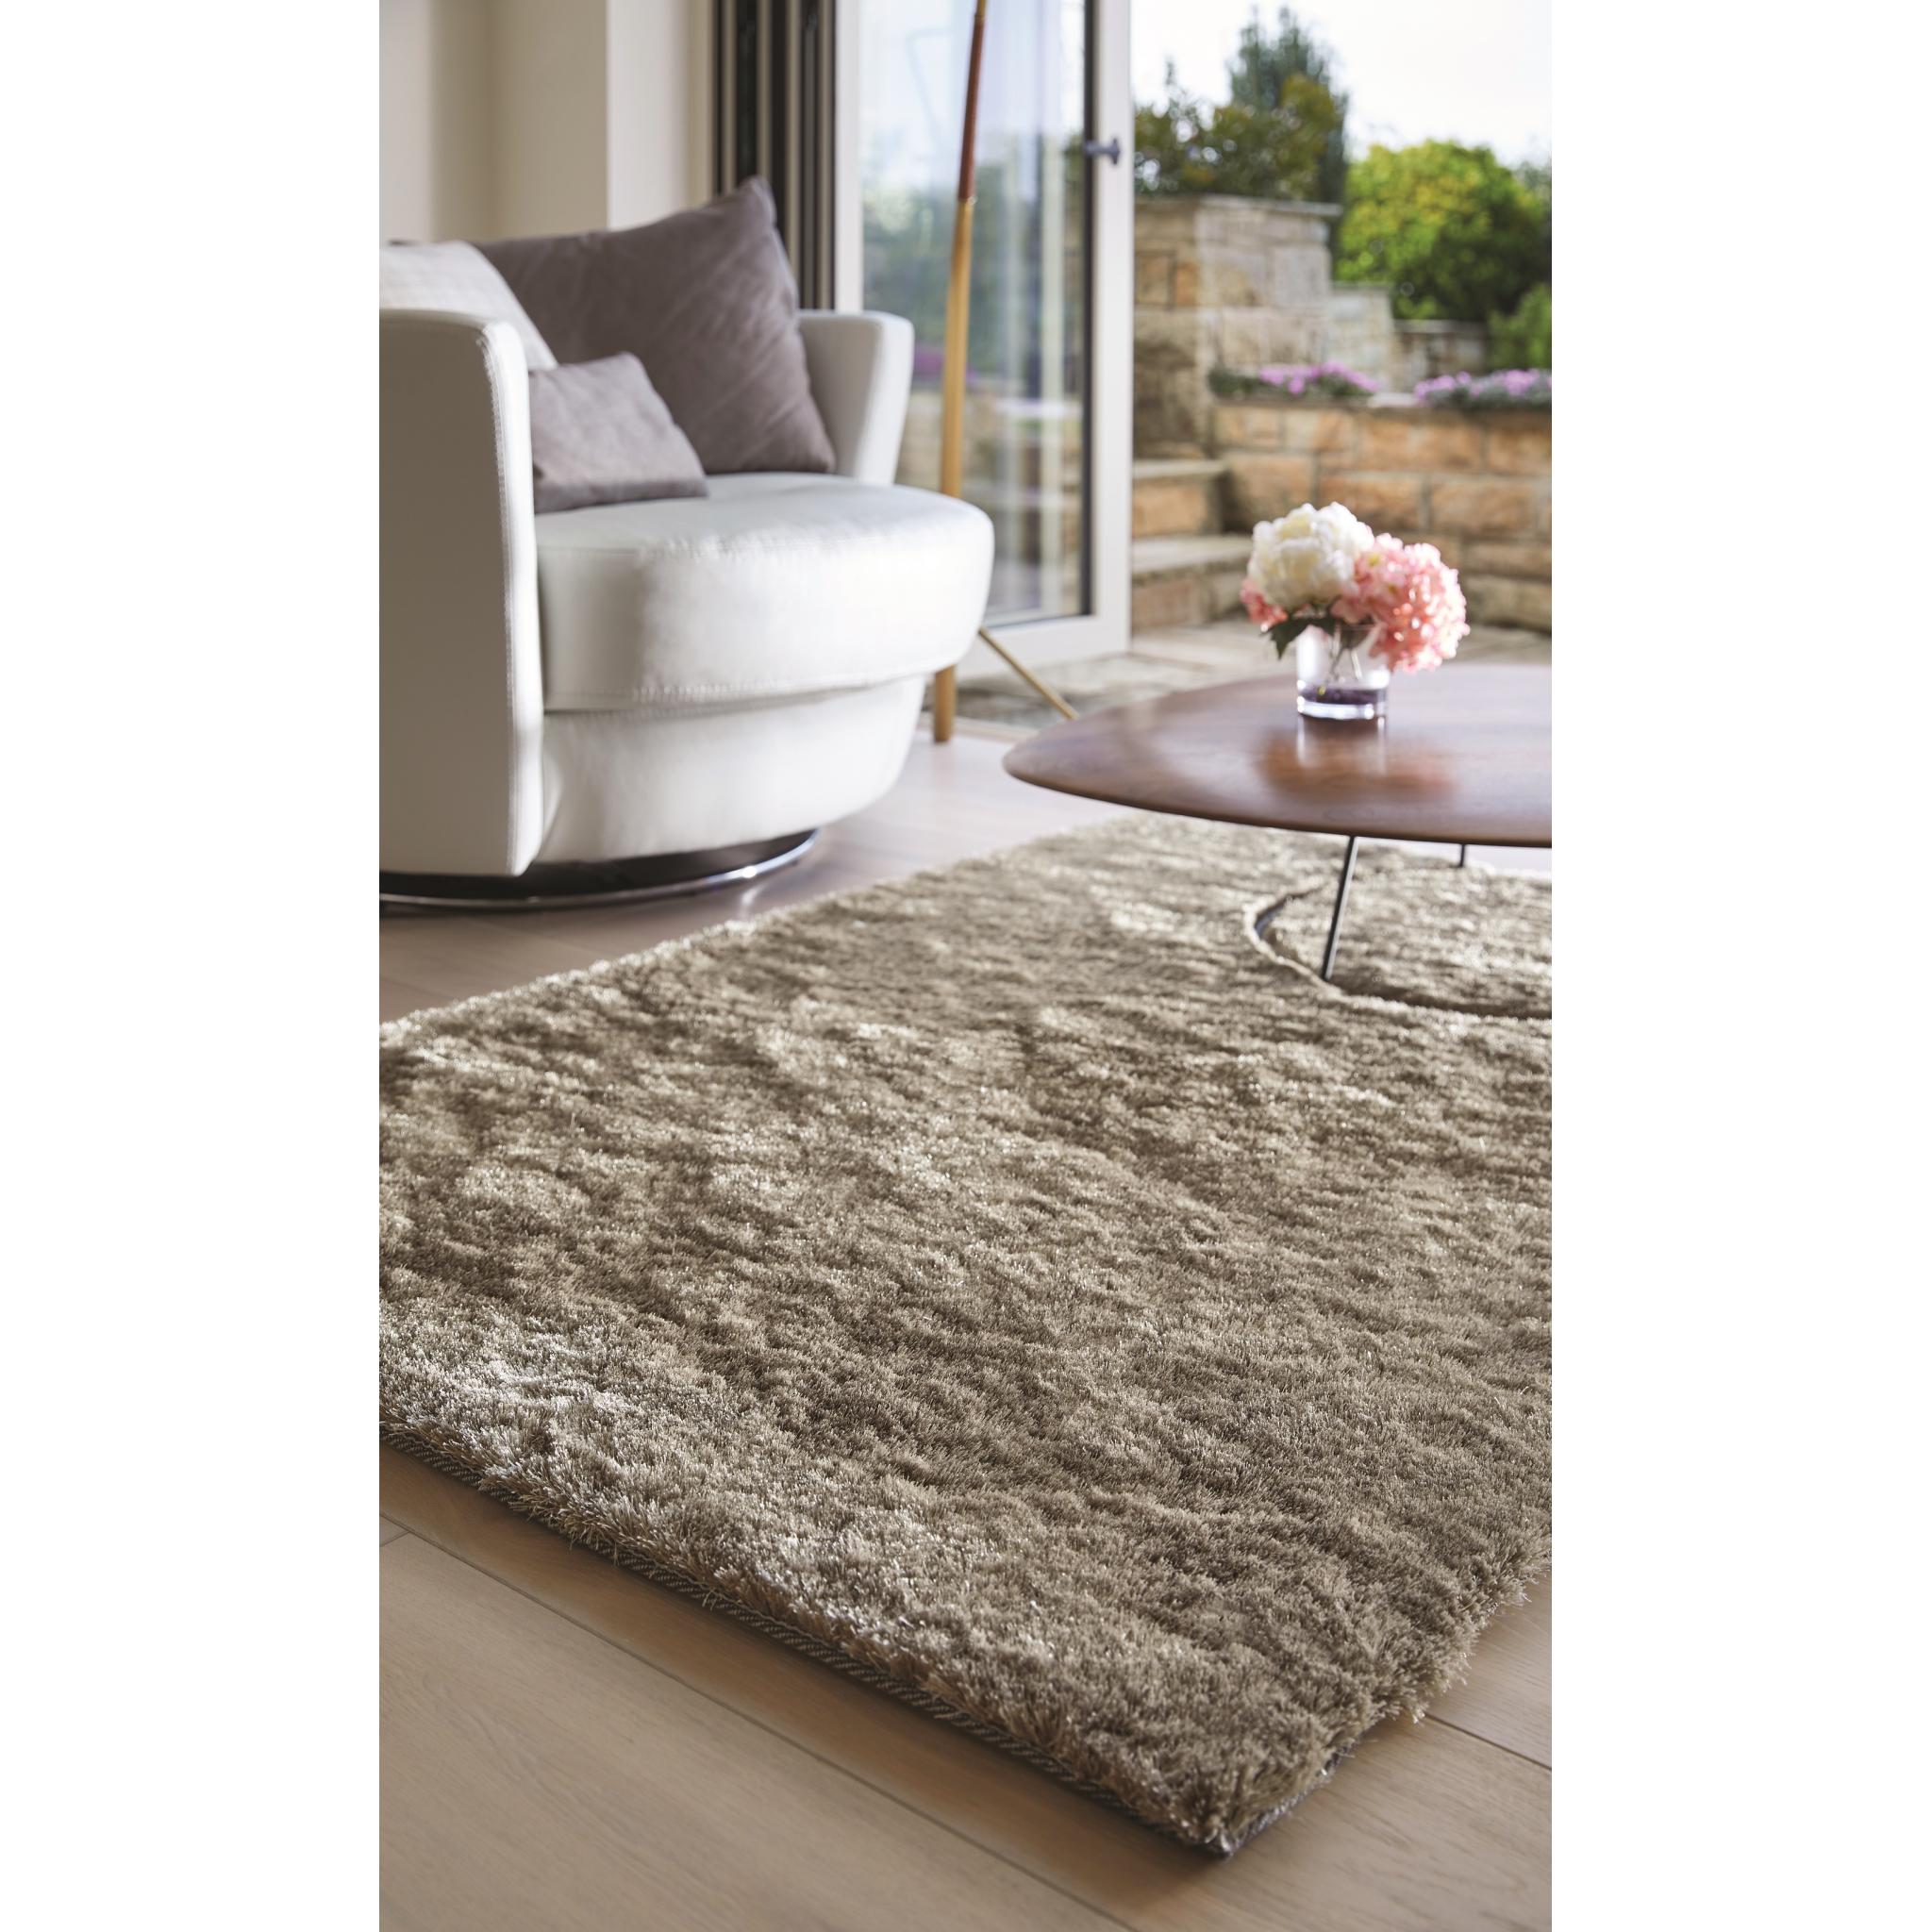 Athena Charcoal Grey Luxurious Deep Pile Shaggy Rug Available In Various Sizes 